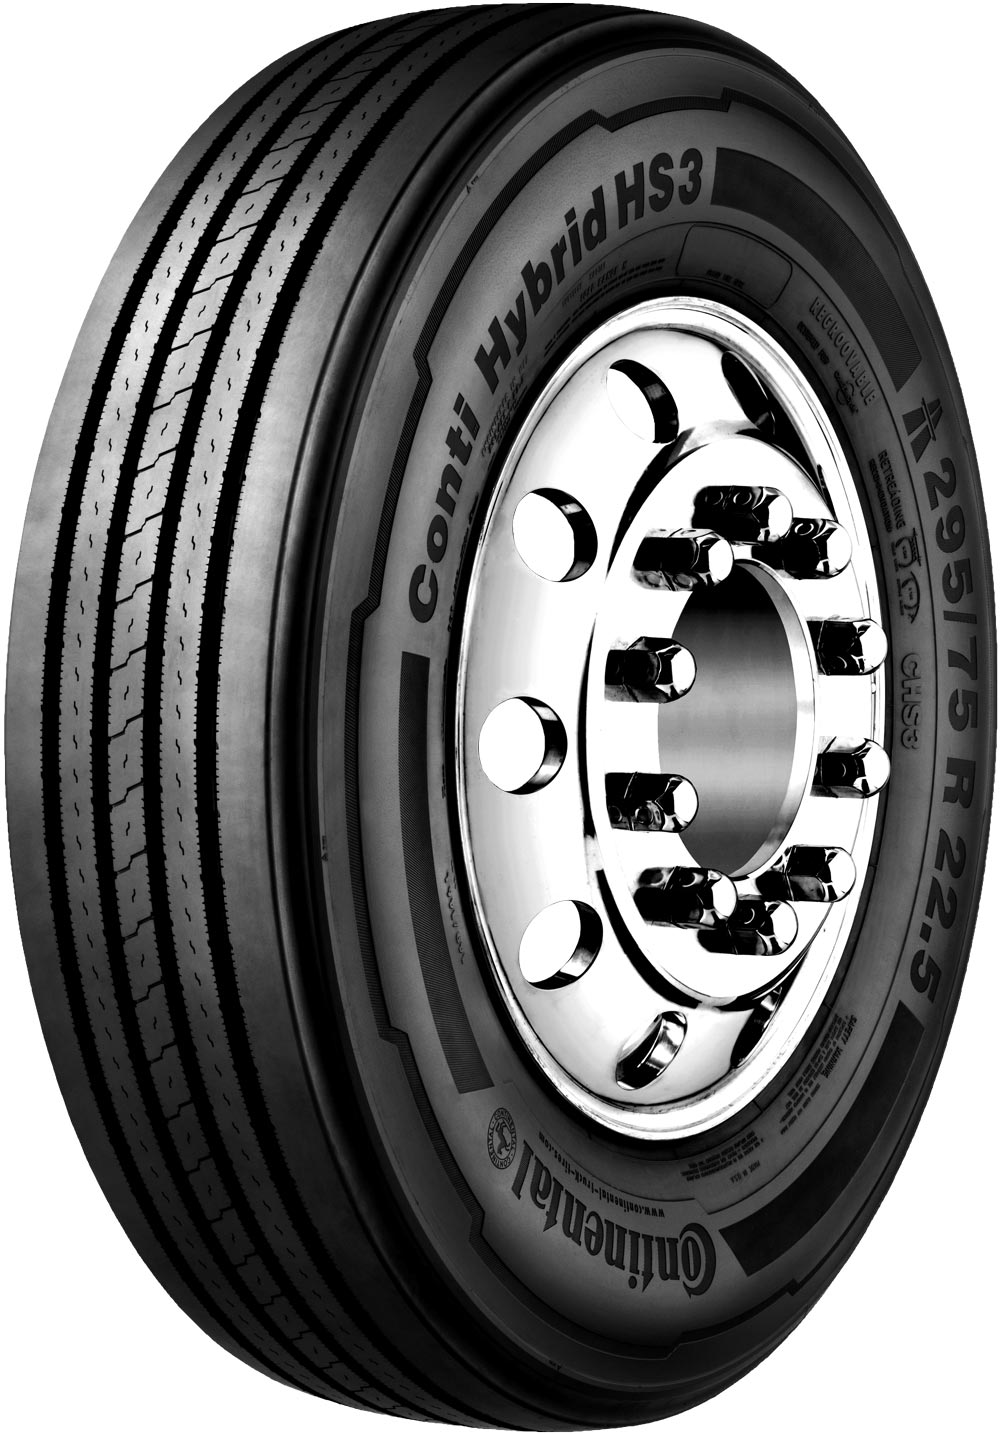 product_type-heavy_tires CONTINENTAL Conti Hybrid HS3 18PR 275/70 R22.5 148M